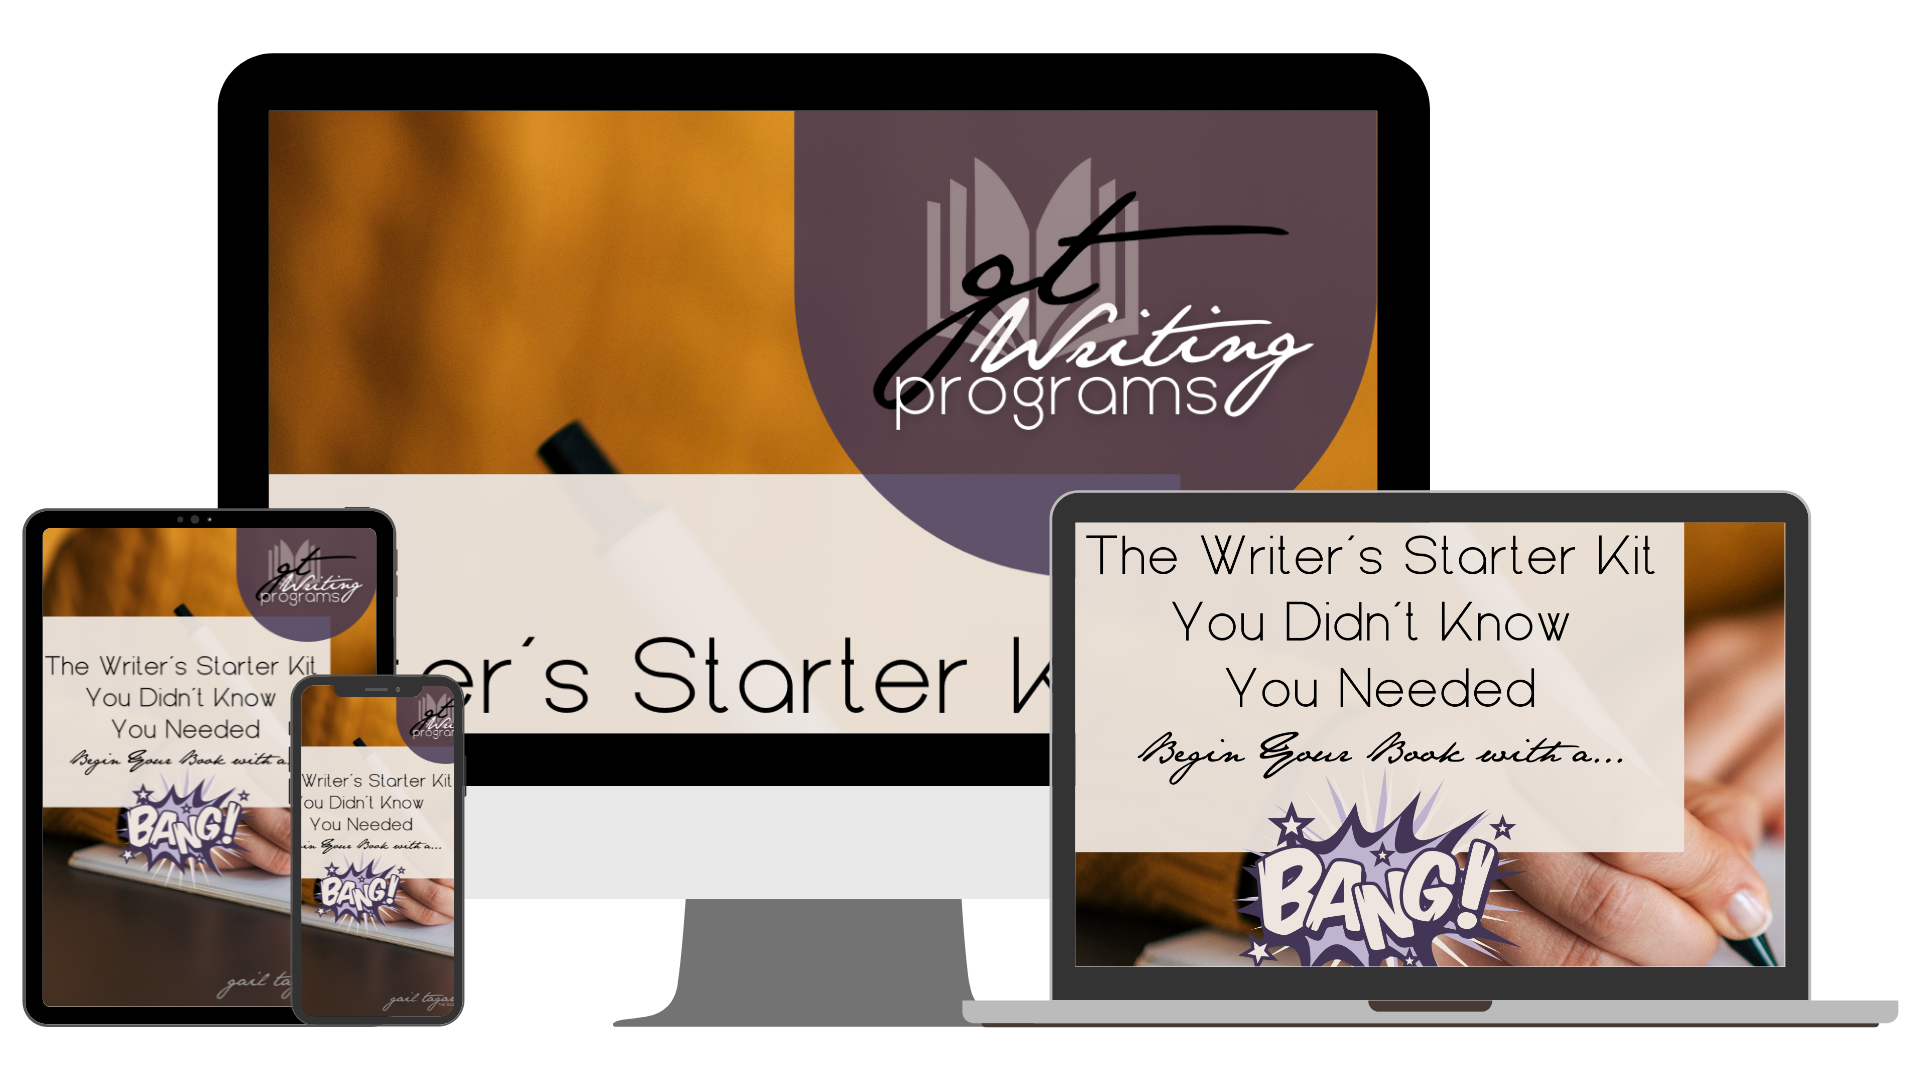 The Writer's Starterkit You Didn't Know You Needed - Gail Tagarro - The Book Writing Coach